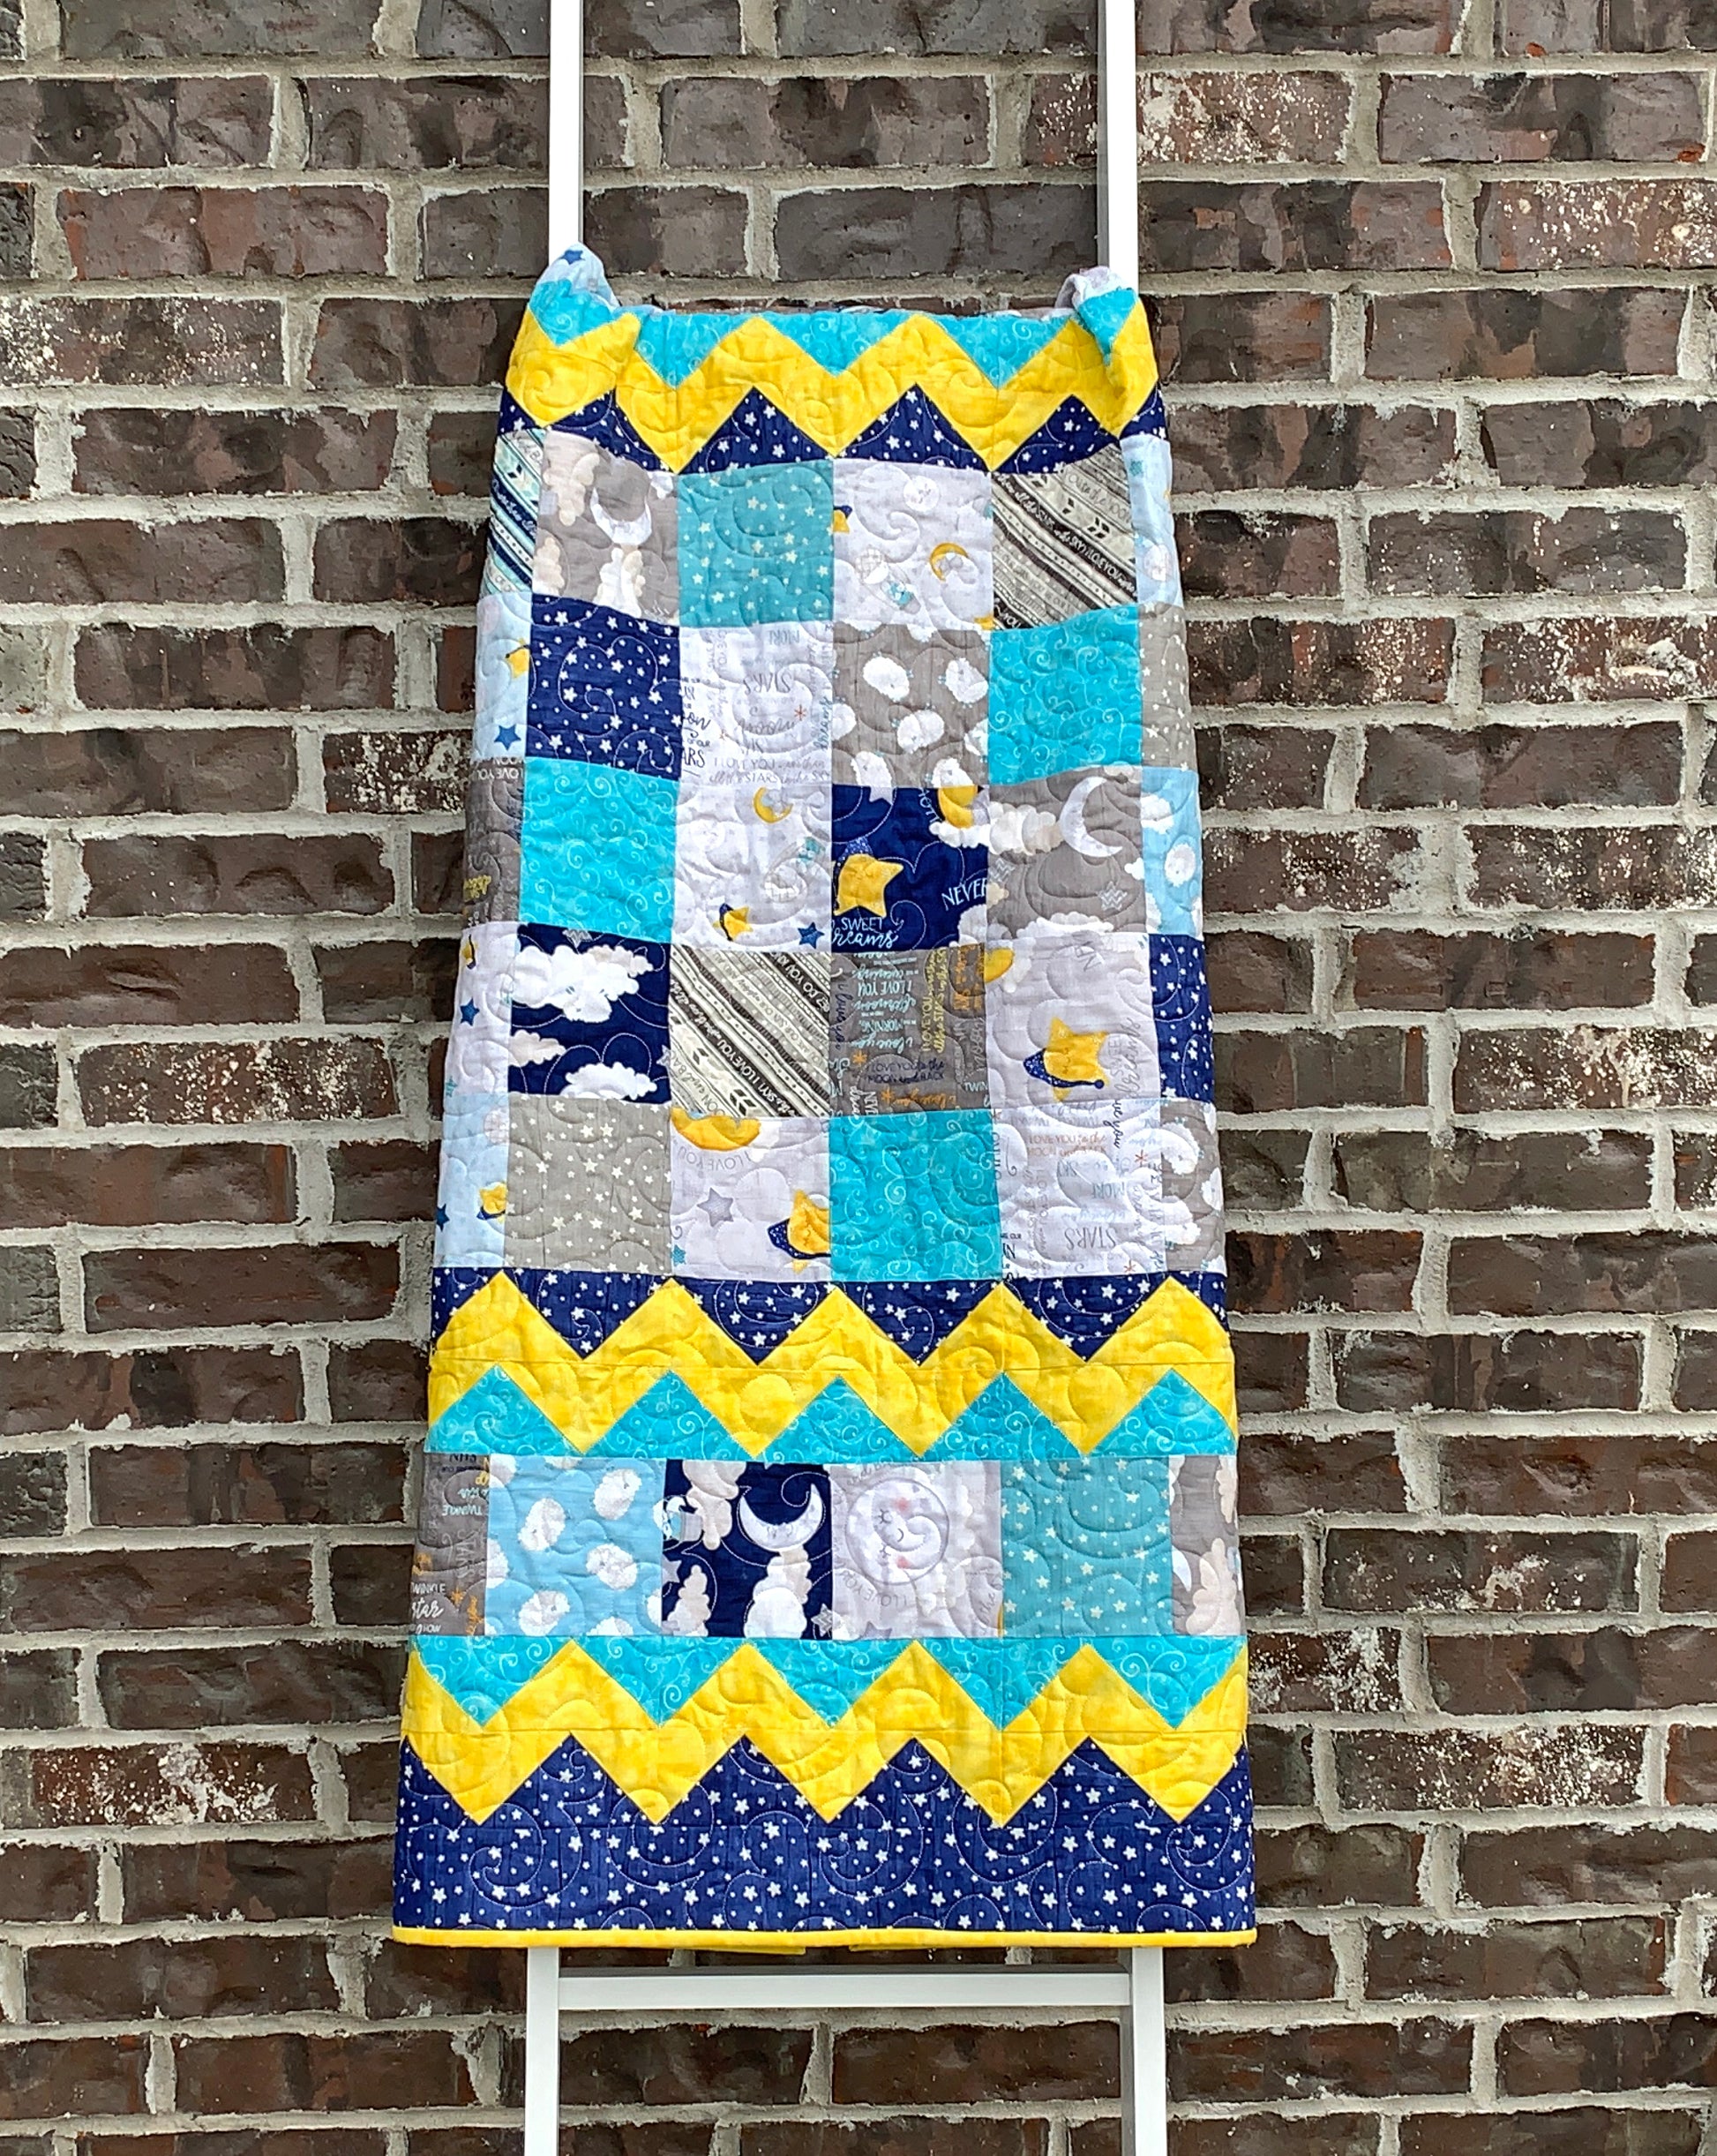 Baby Blocks charm square baby quilt pattern with yellow top and bottom zig-zag rows that look like rick-rack with rows of patchwork squares in between. Quilt is trimmed in blue and yellow and is shown displayed on a ladder.